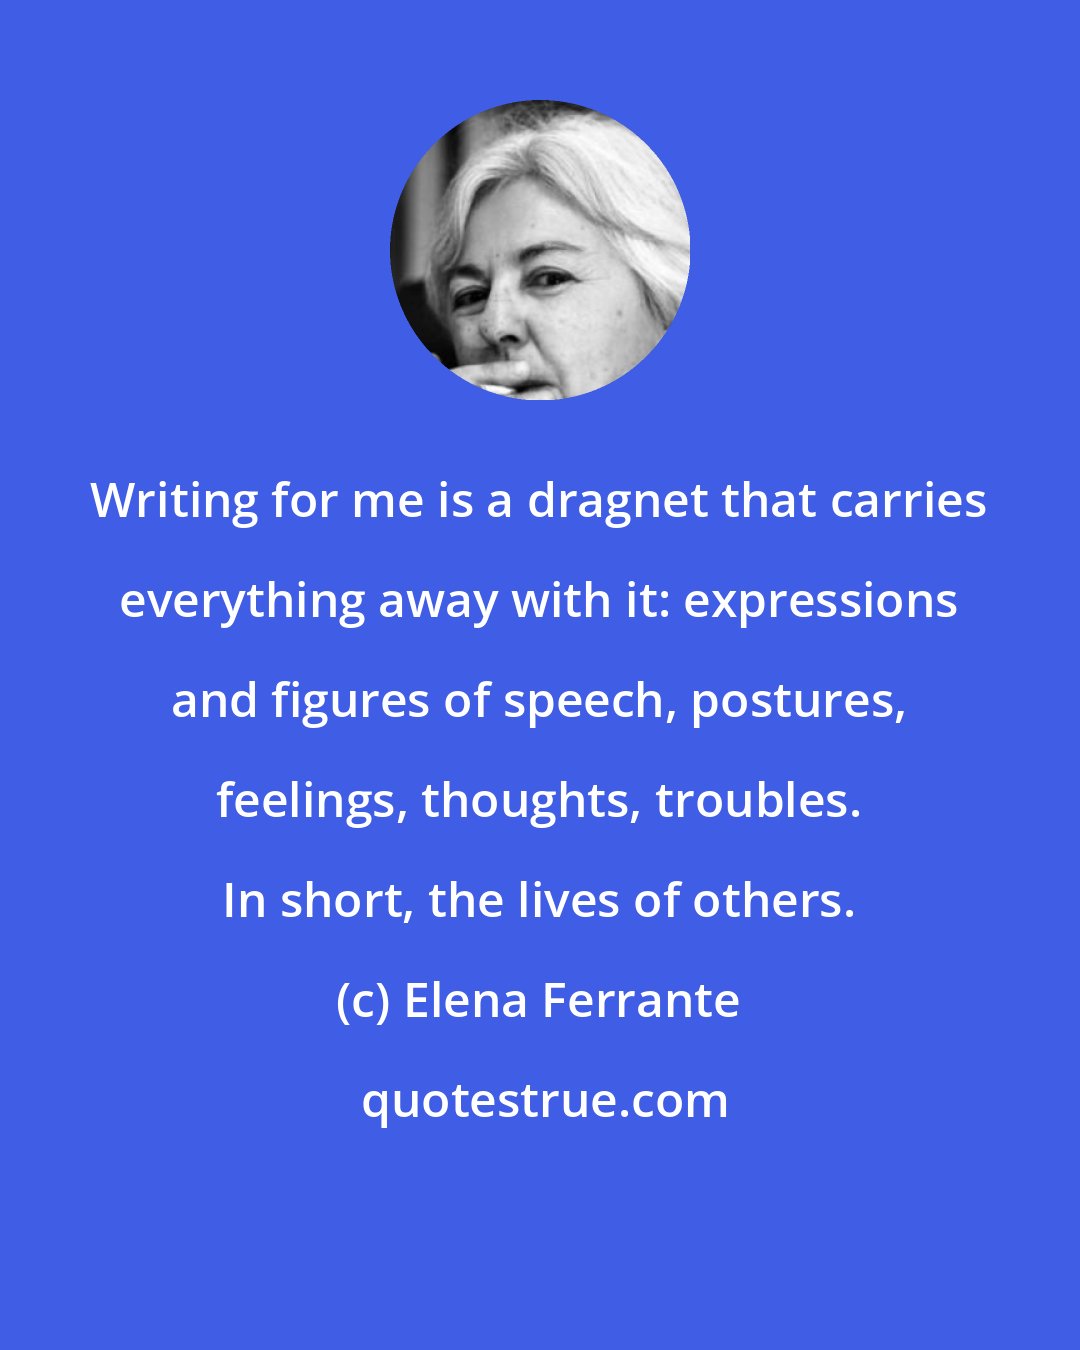 Elena Ferrante: Writing for me is a dragnet that carries everything away with it: expressions and figures of speech, postures, feelings, thoughts, troubles. In short, the lives of others.